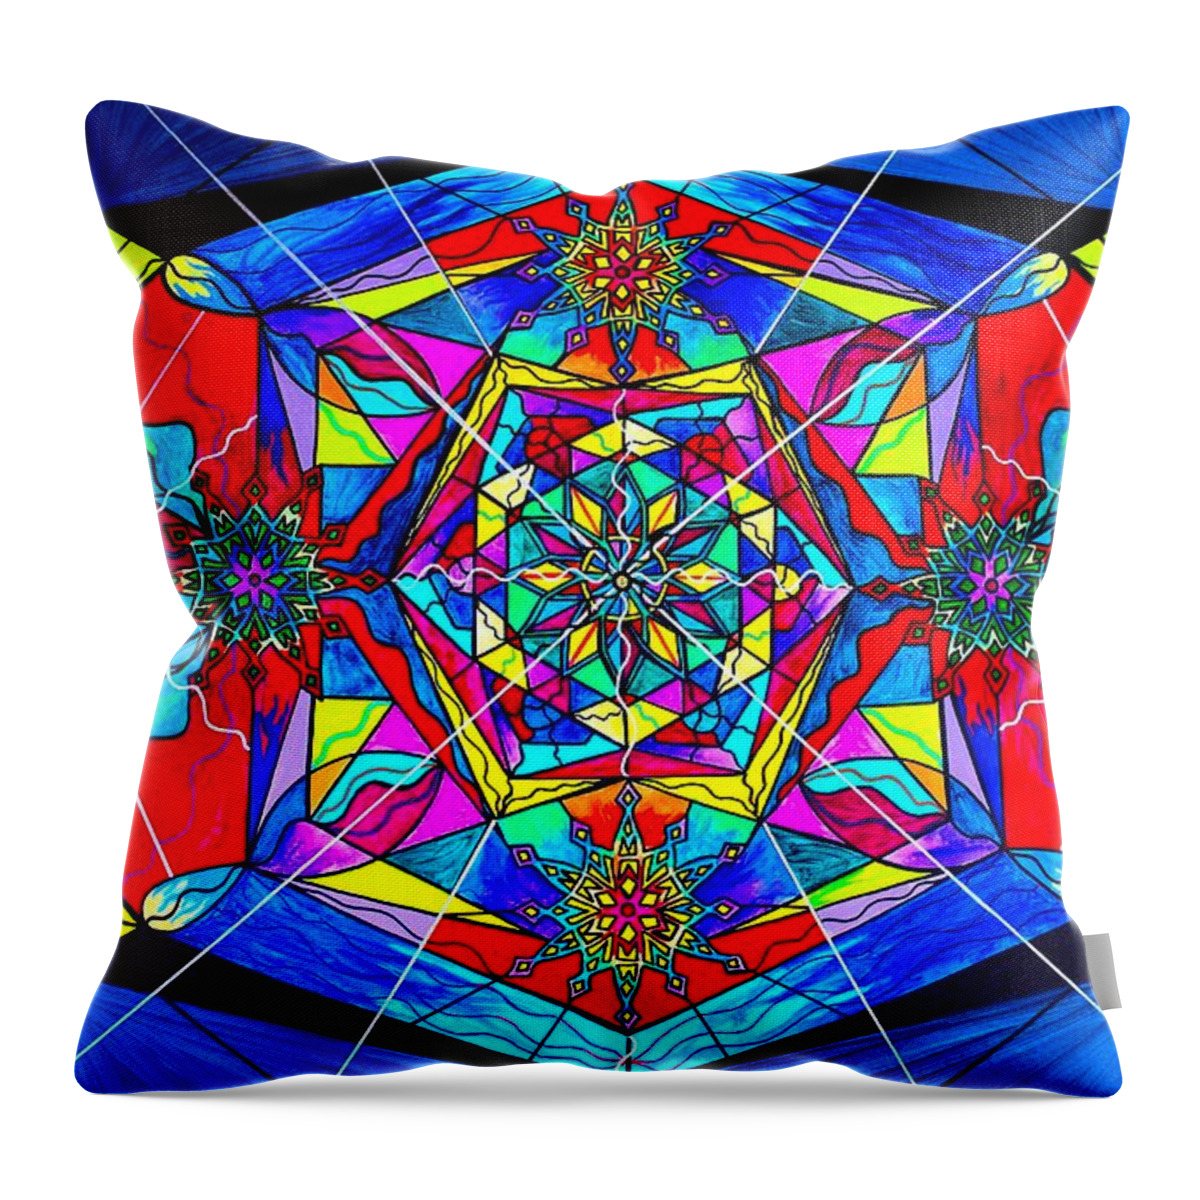 Vibration Throw Pillow featuring the painting Gratitude by Teal Eye Print Store